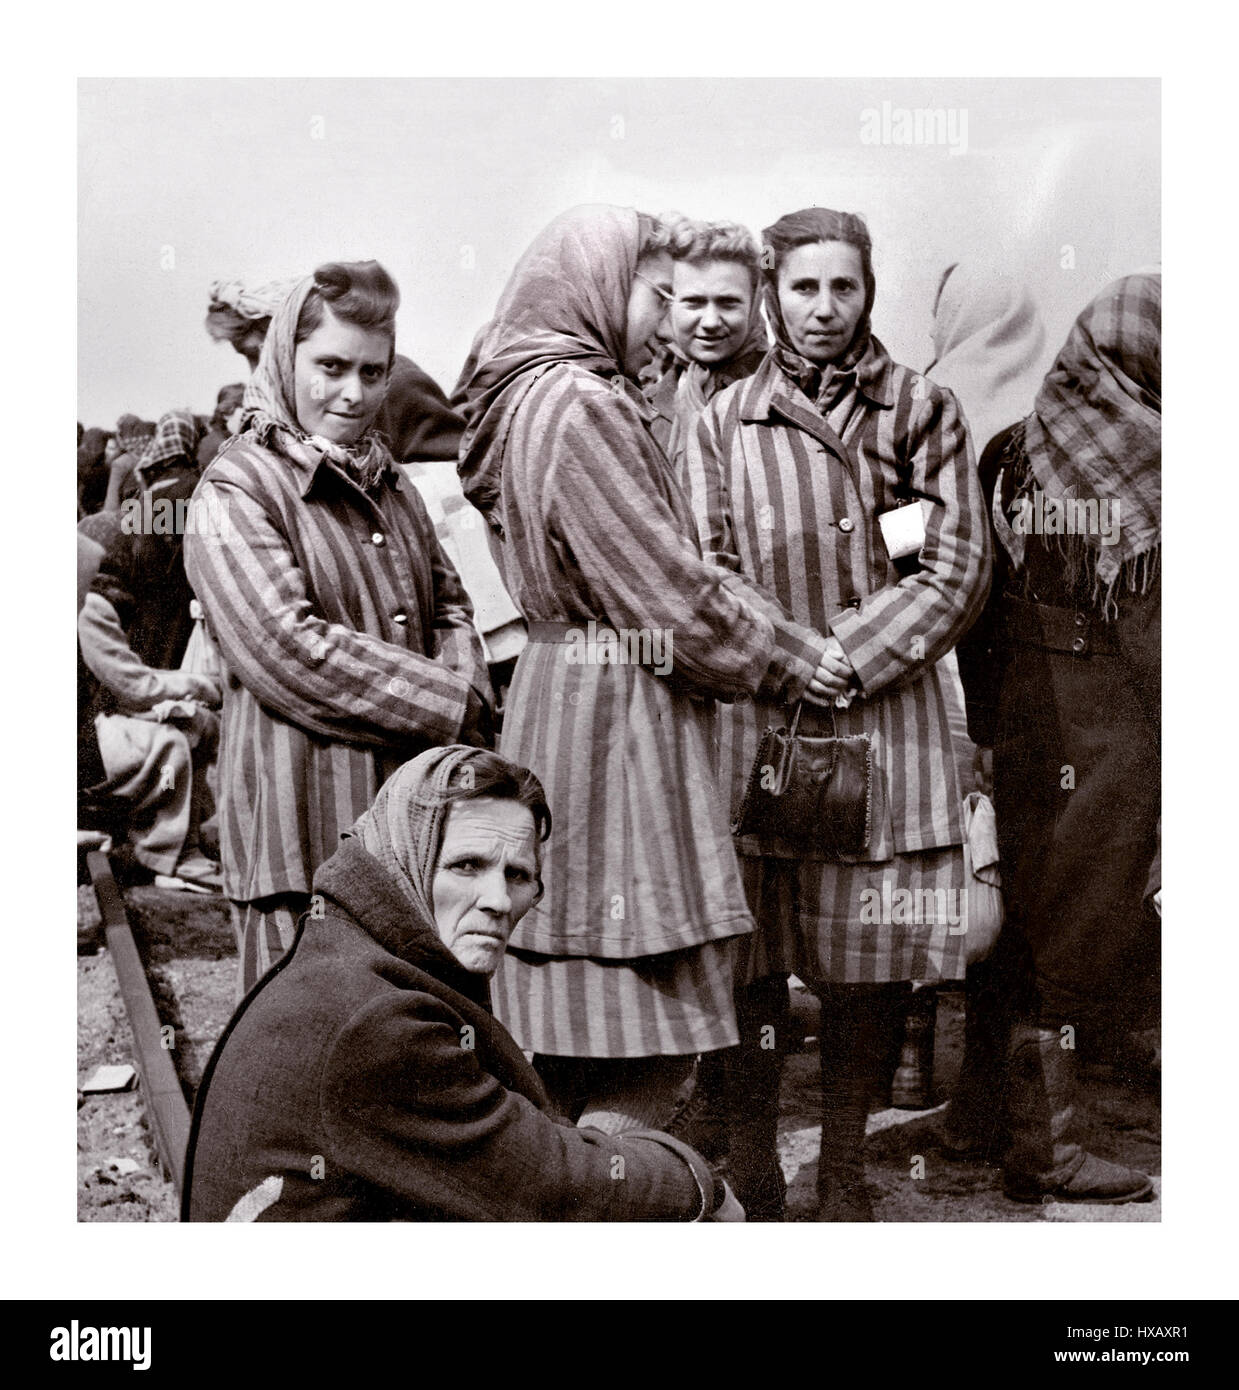 RAVENSBRÜCK Women prisoners in striped camp uniform of the Ravensbrück concentration and extermination camp run by WW2 Nazi Germany, just liberated 1945 by the Red Army. The female-only prison camp,was located 90 km north of Berlin…Nazi Germany World War II Second World War Stock Photo